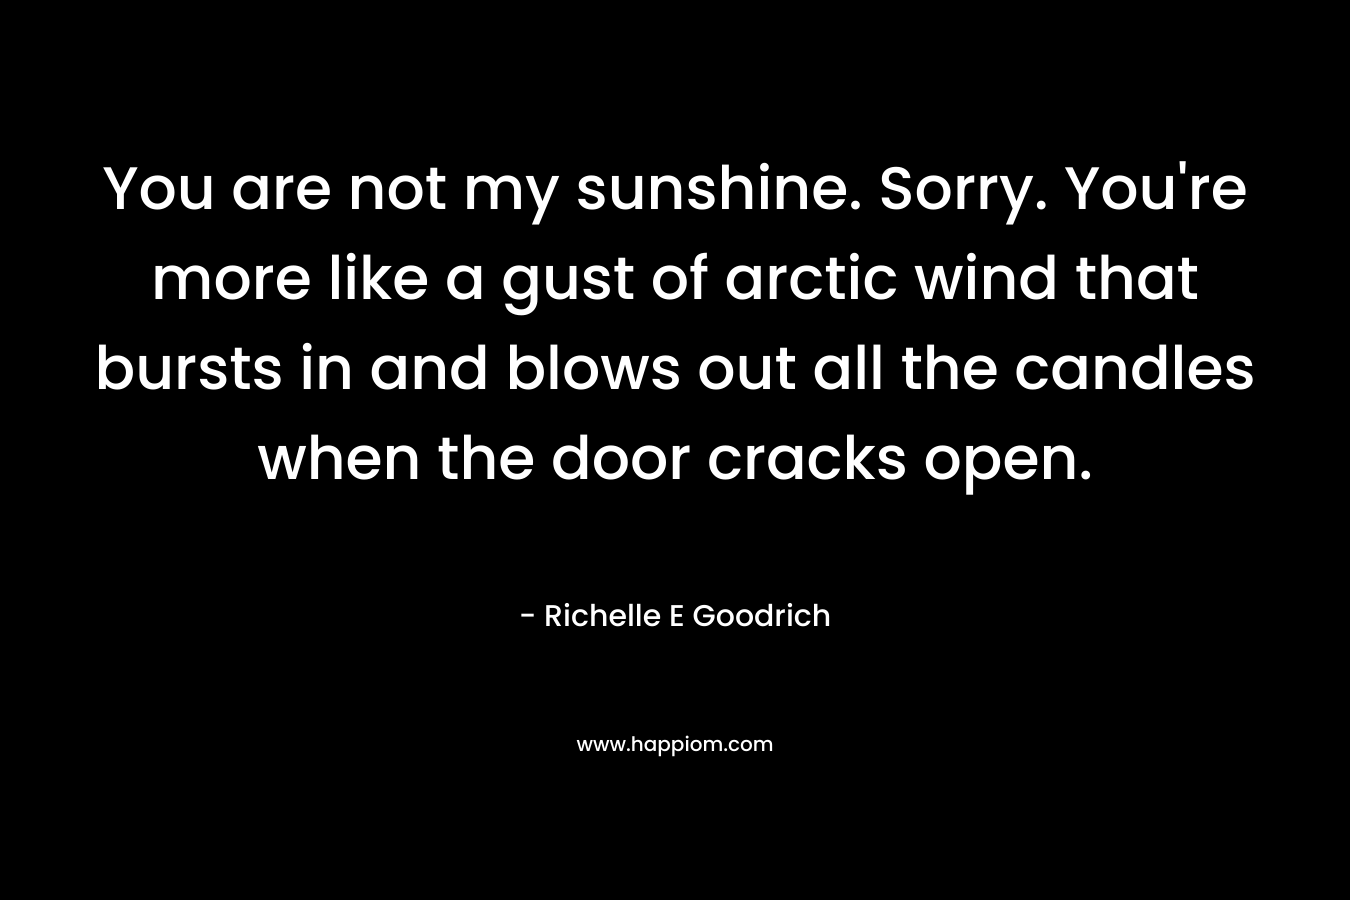 You are not my sunshine. Sorry. You’re more like a gust of arctic wind that bursts in and blows out all the candles when the door cracks open. – Richelle E Goodrich